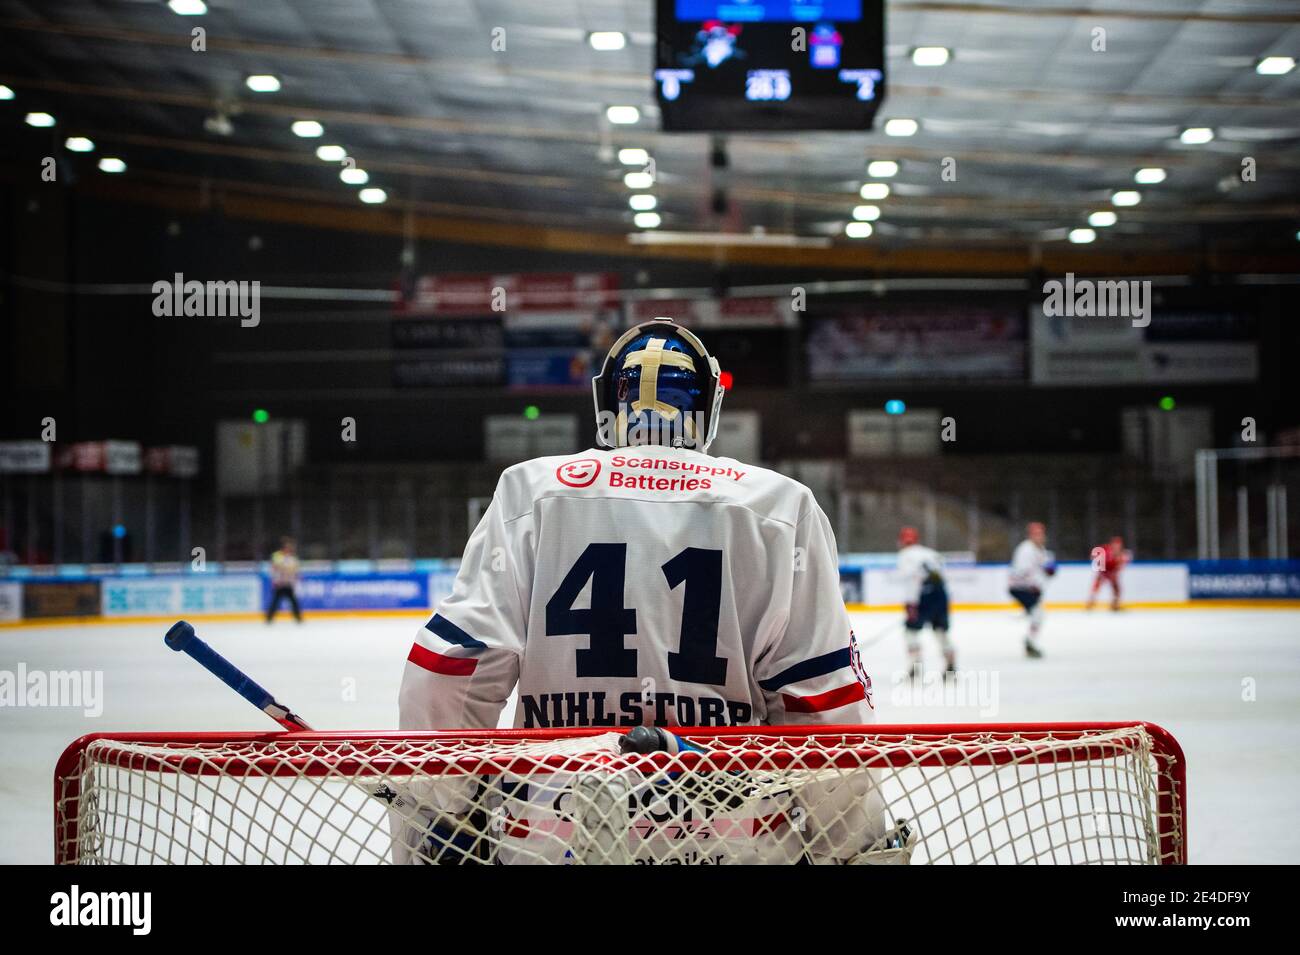 Rodovre, Denmark. 22nd, January 2021. Goaltender Cristopher Nihlstorp (41) of Rungsted Seier Capital in the hockey match between Rodovre Mighty Bulls and Rungsted Seier Capital at Rodovre Centrum Arena